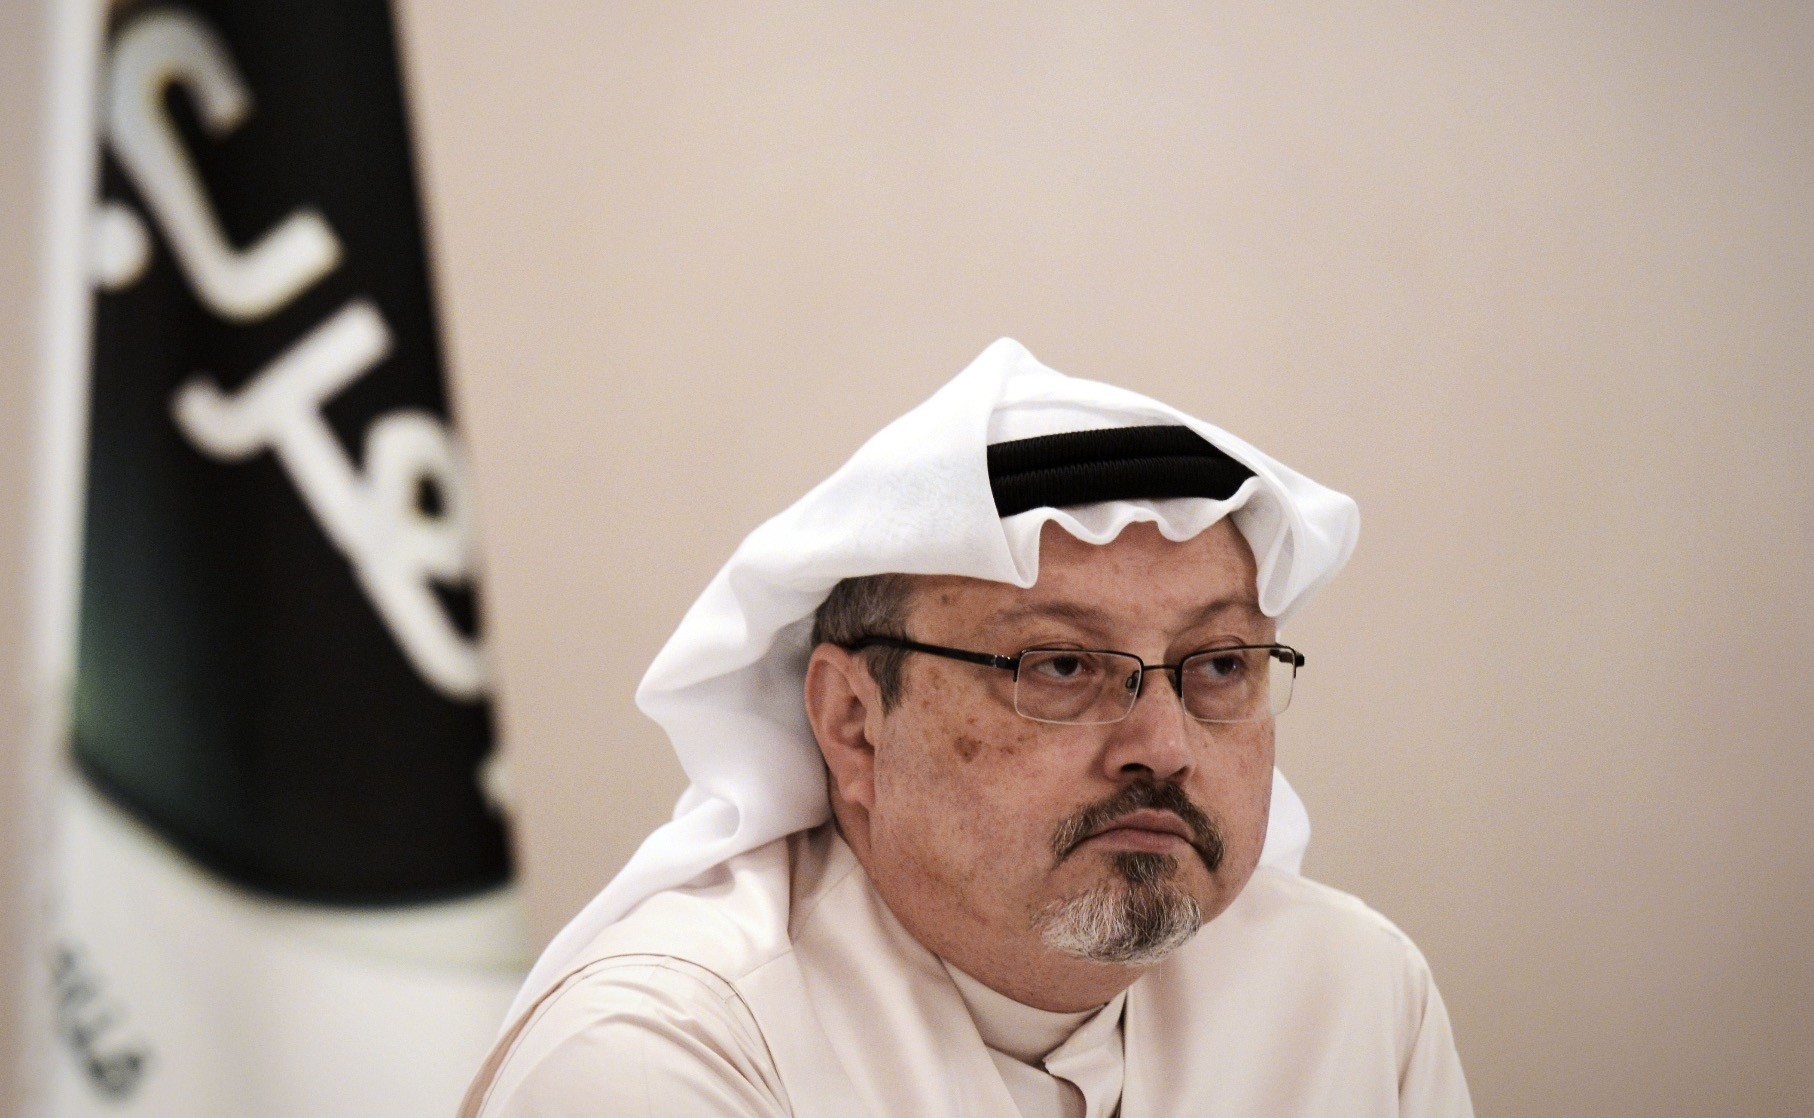 Prominent Saudi journalist and critic Jamal Khashoggi looks on during a press conference in the Bahraini capital Manama, December 2014. According to Turkish police and anonymous officials, Khashoggi was killed inside the Saudi Embassy in Istanbul aft